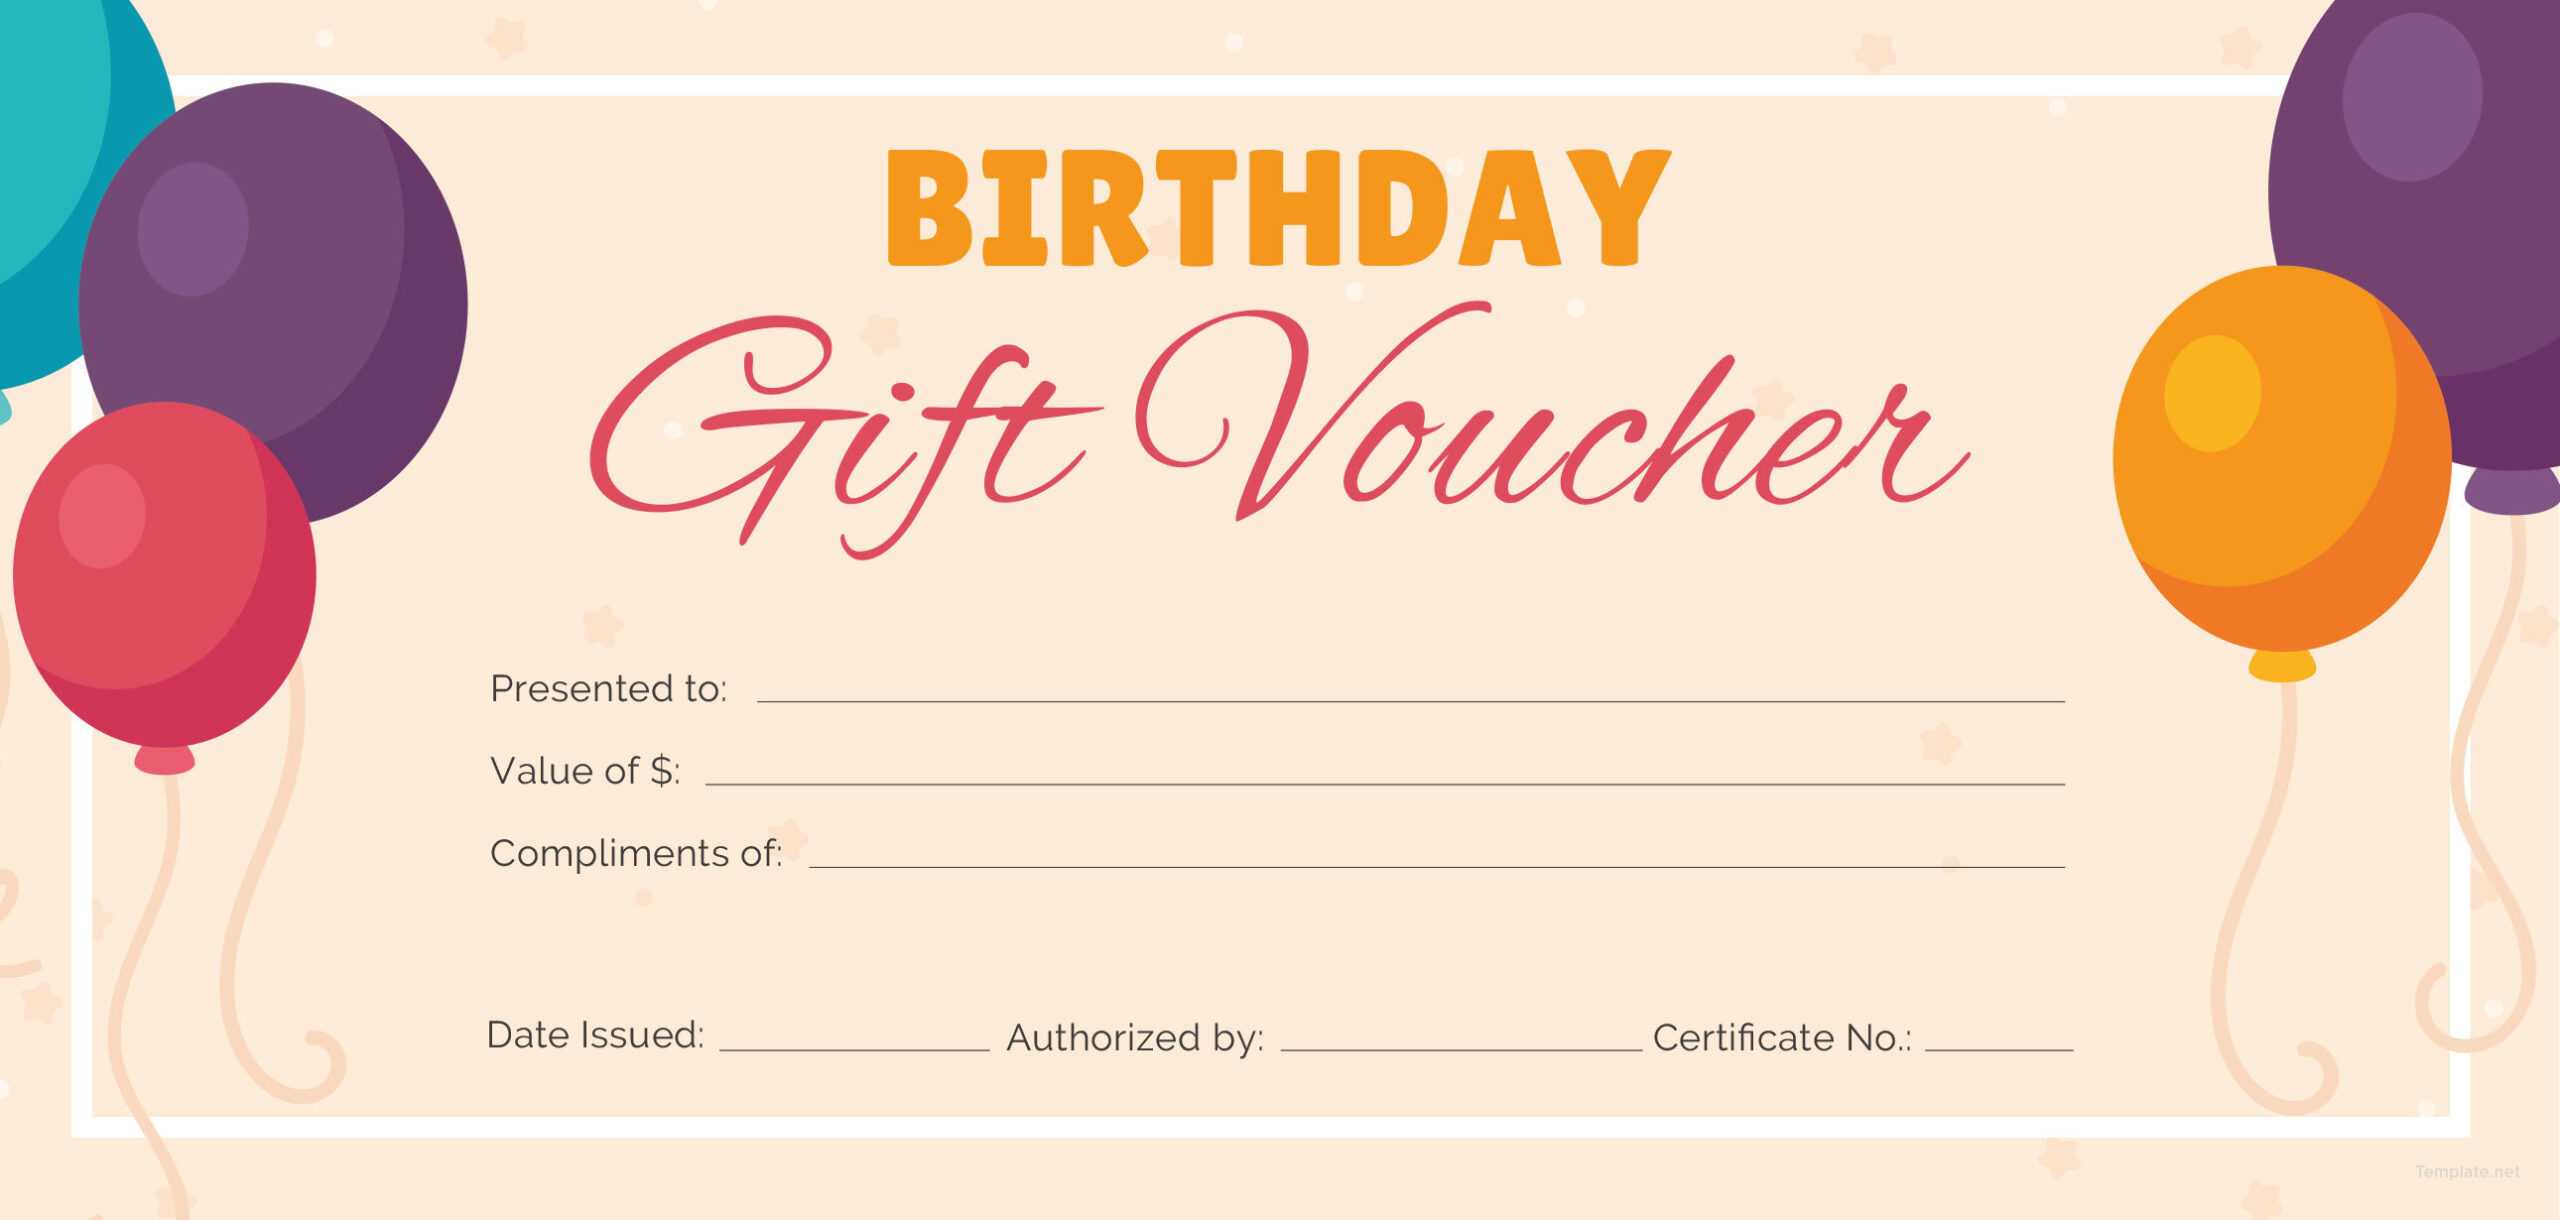 Free Birthday Gift Certificate Templates | Certificate For Track And Field Certificate Templates Free